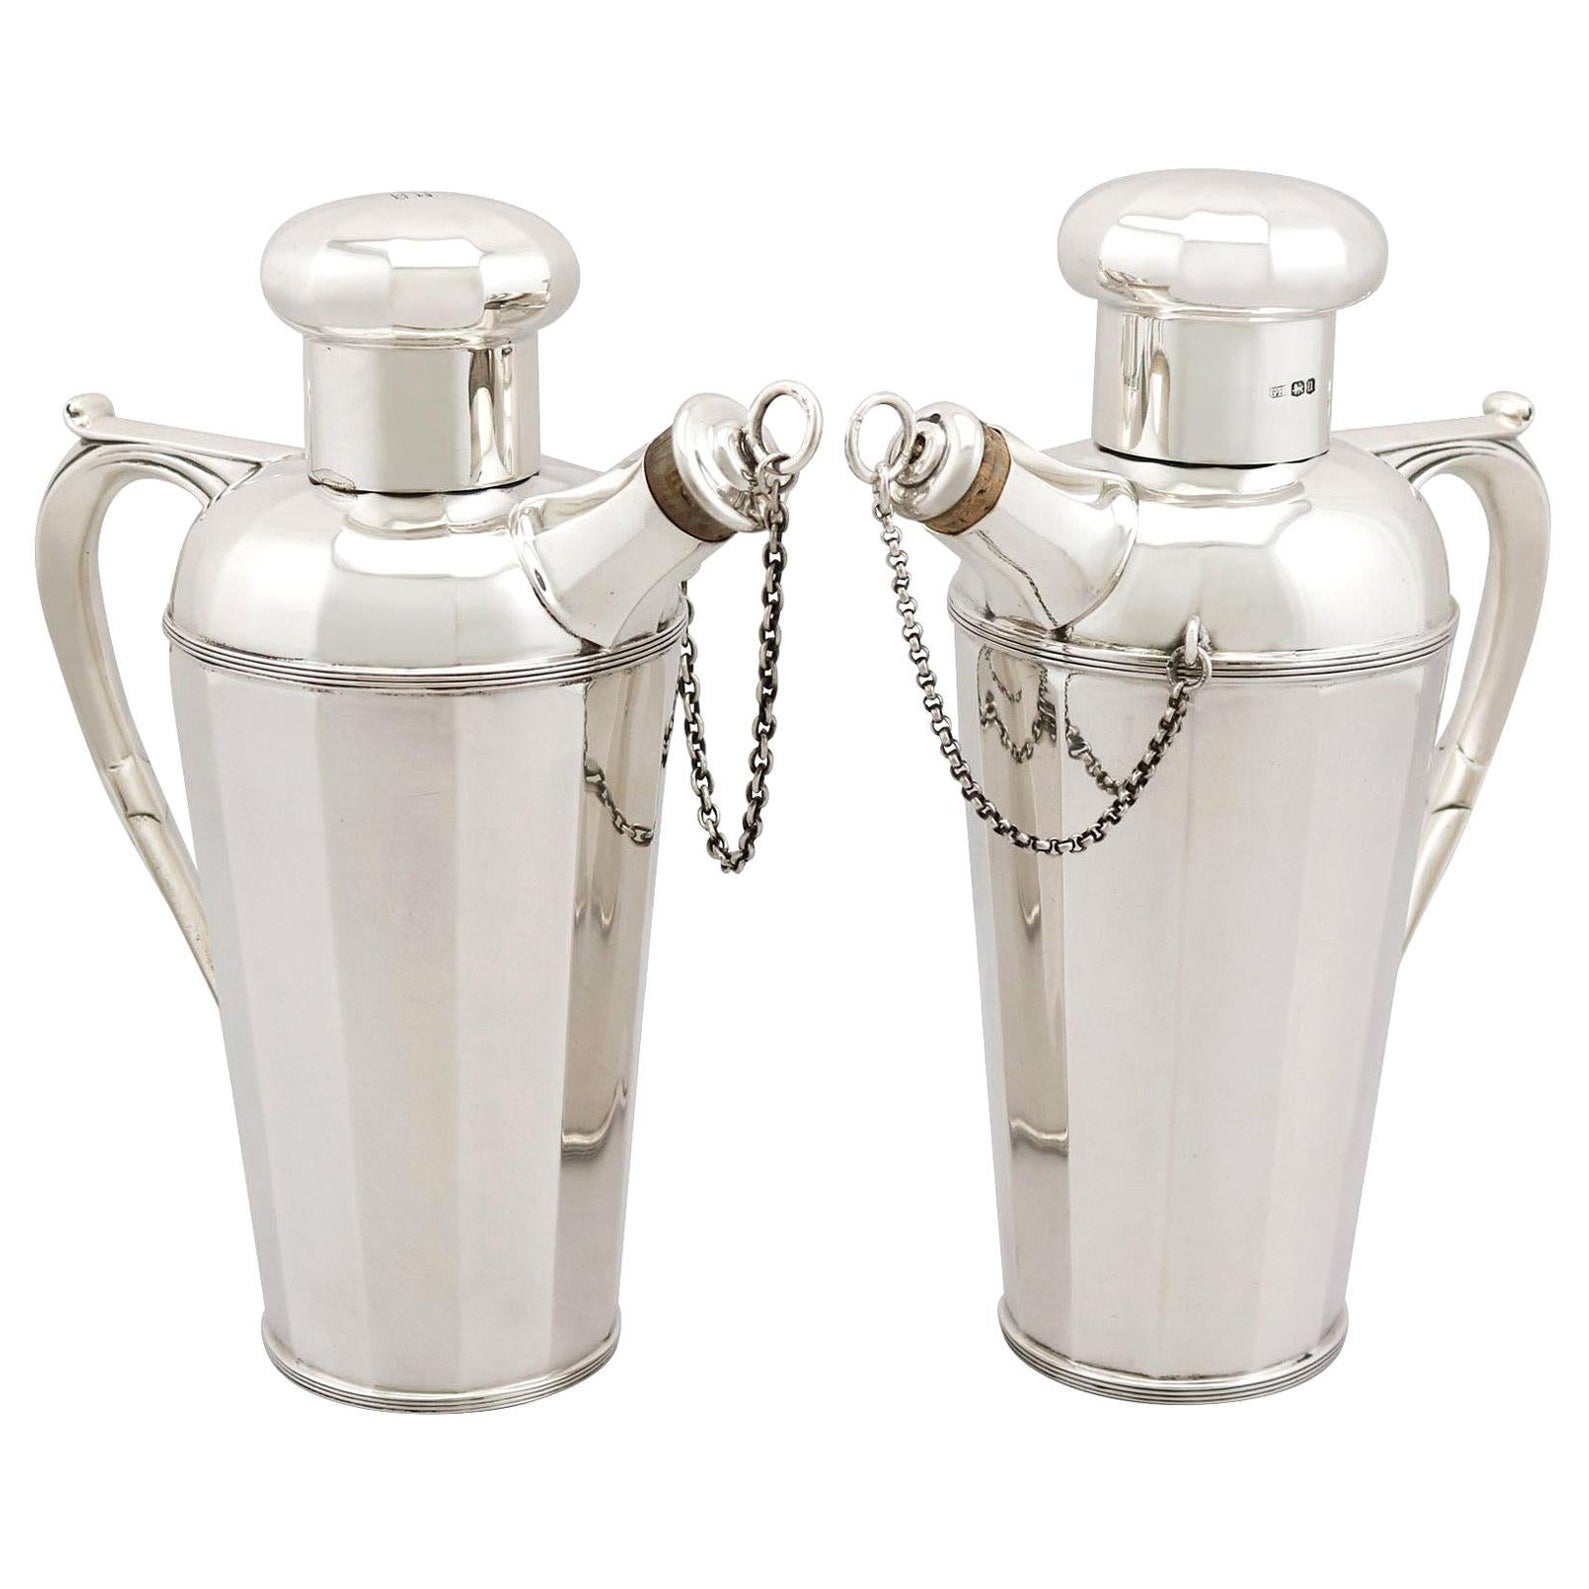 Antique Art Deco Style Sterling Silver Cocktail Shakers